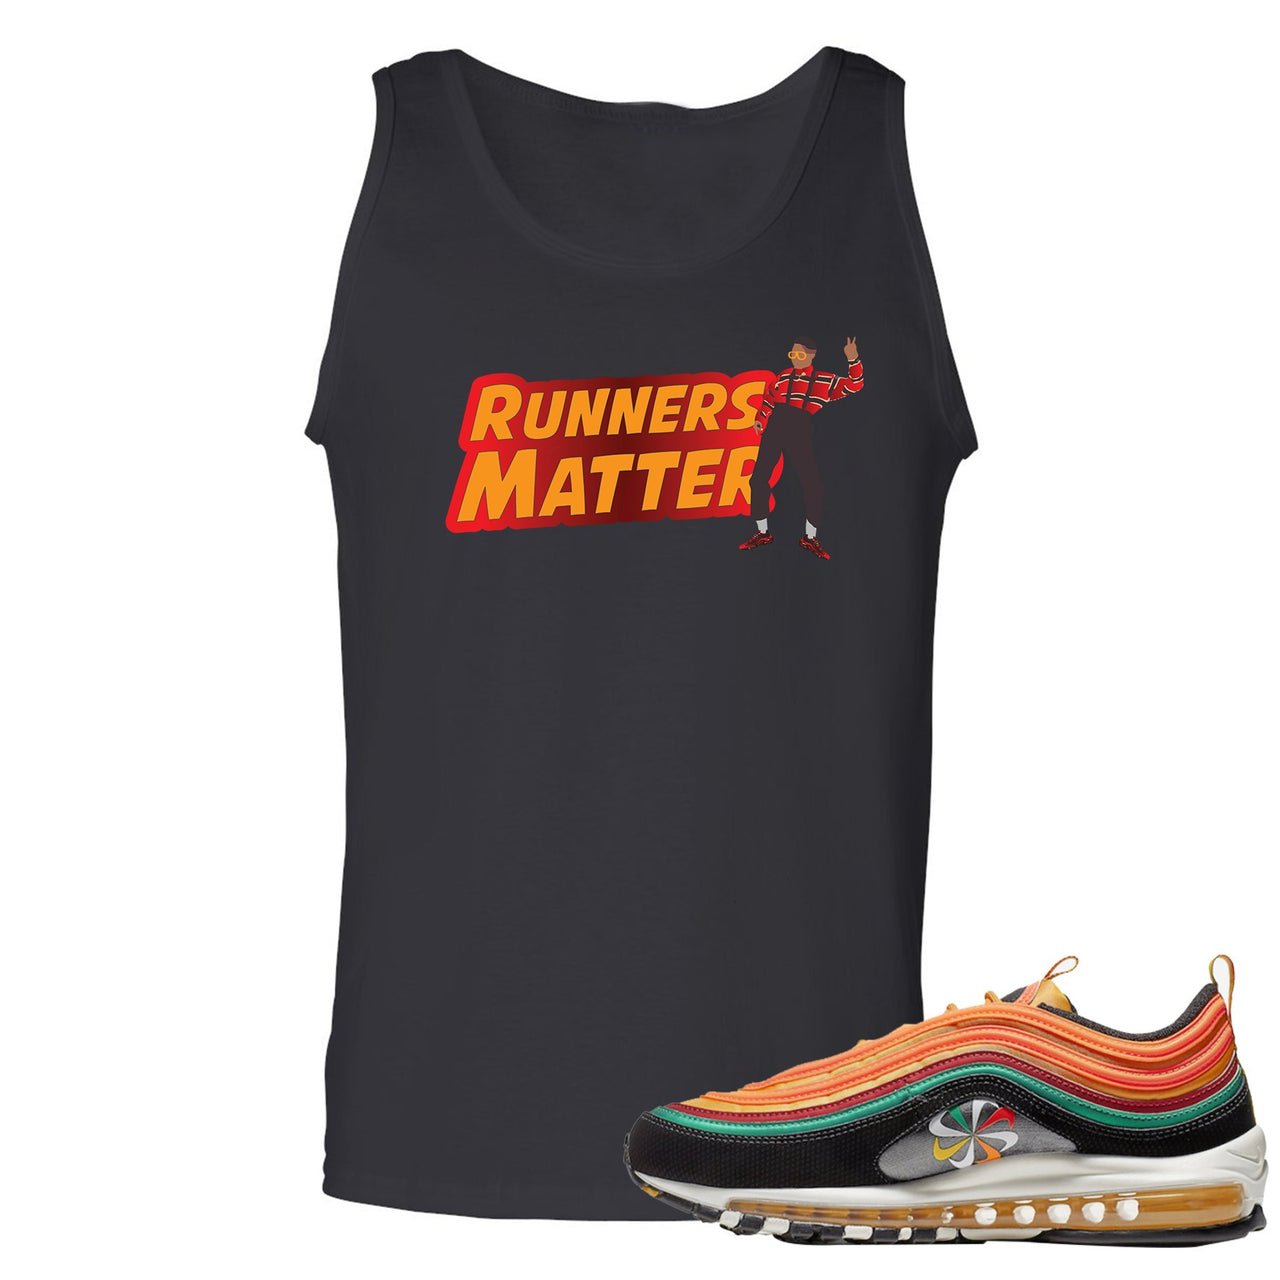 Printed on the front of the Air Max 97 sunburst black sneaker matching tank top is the runners matter logo